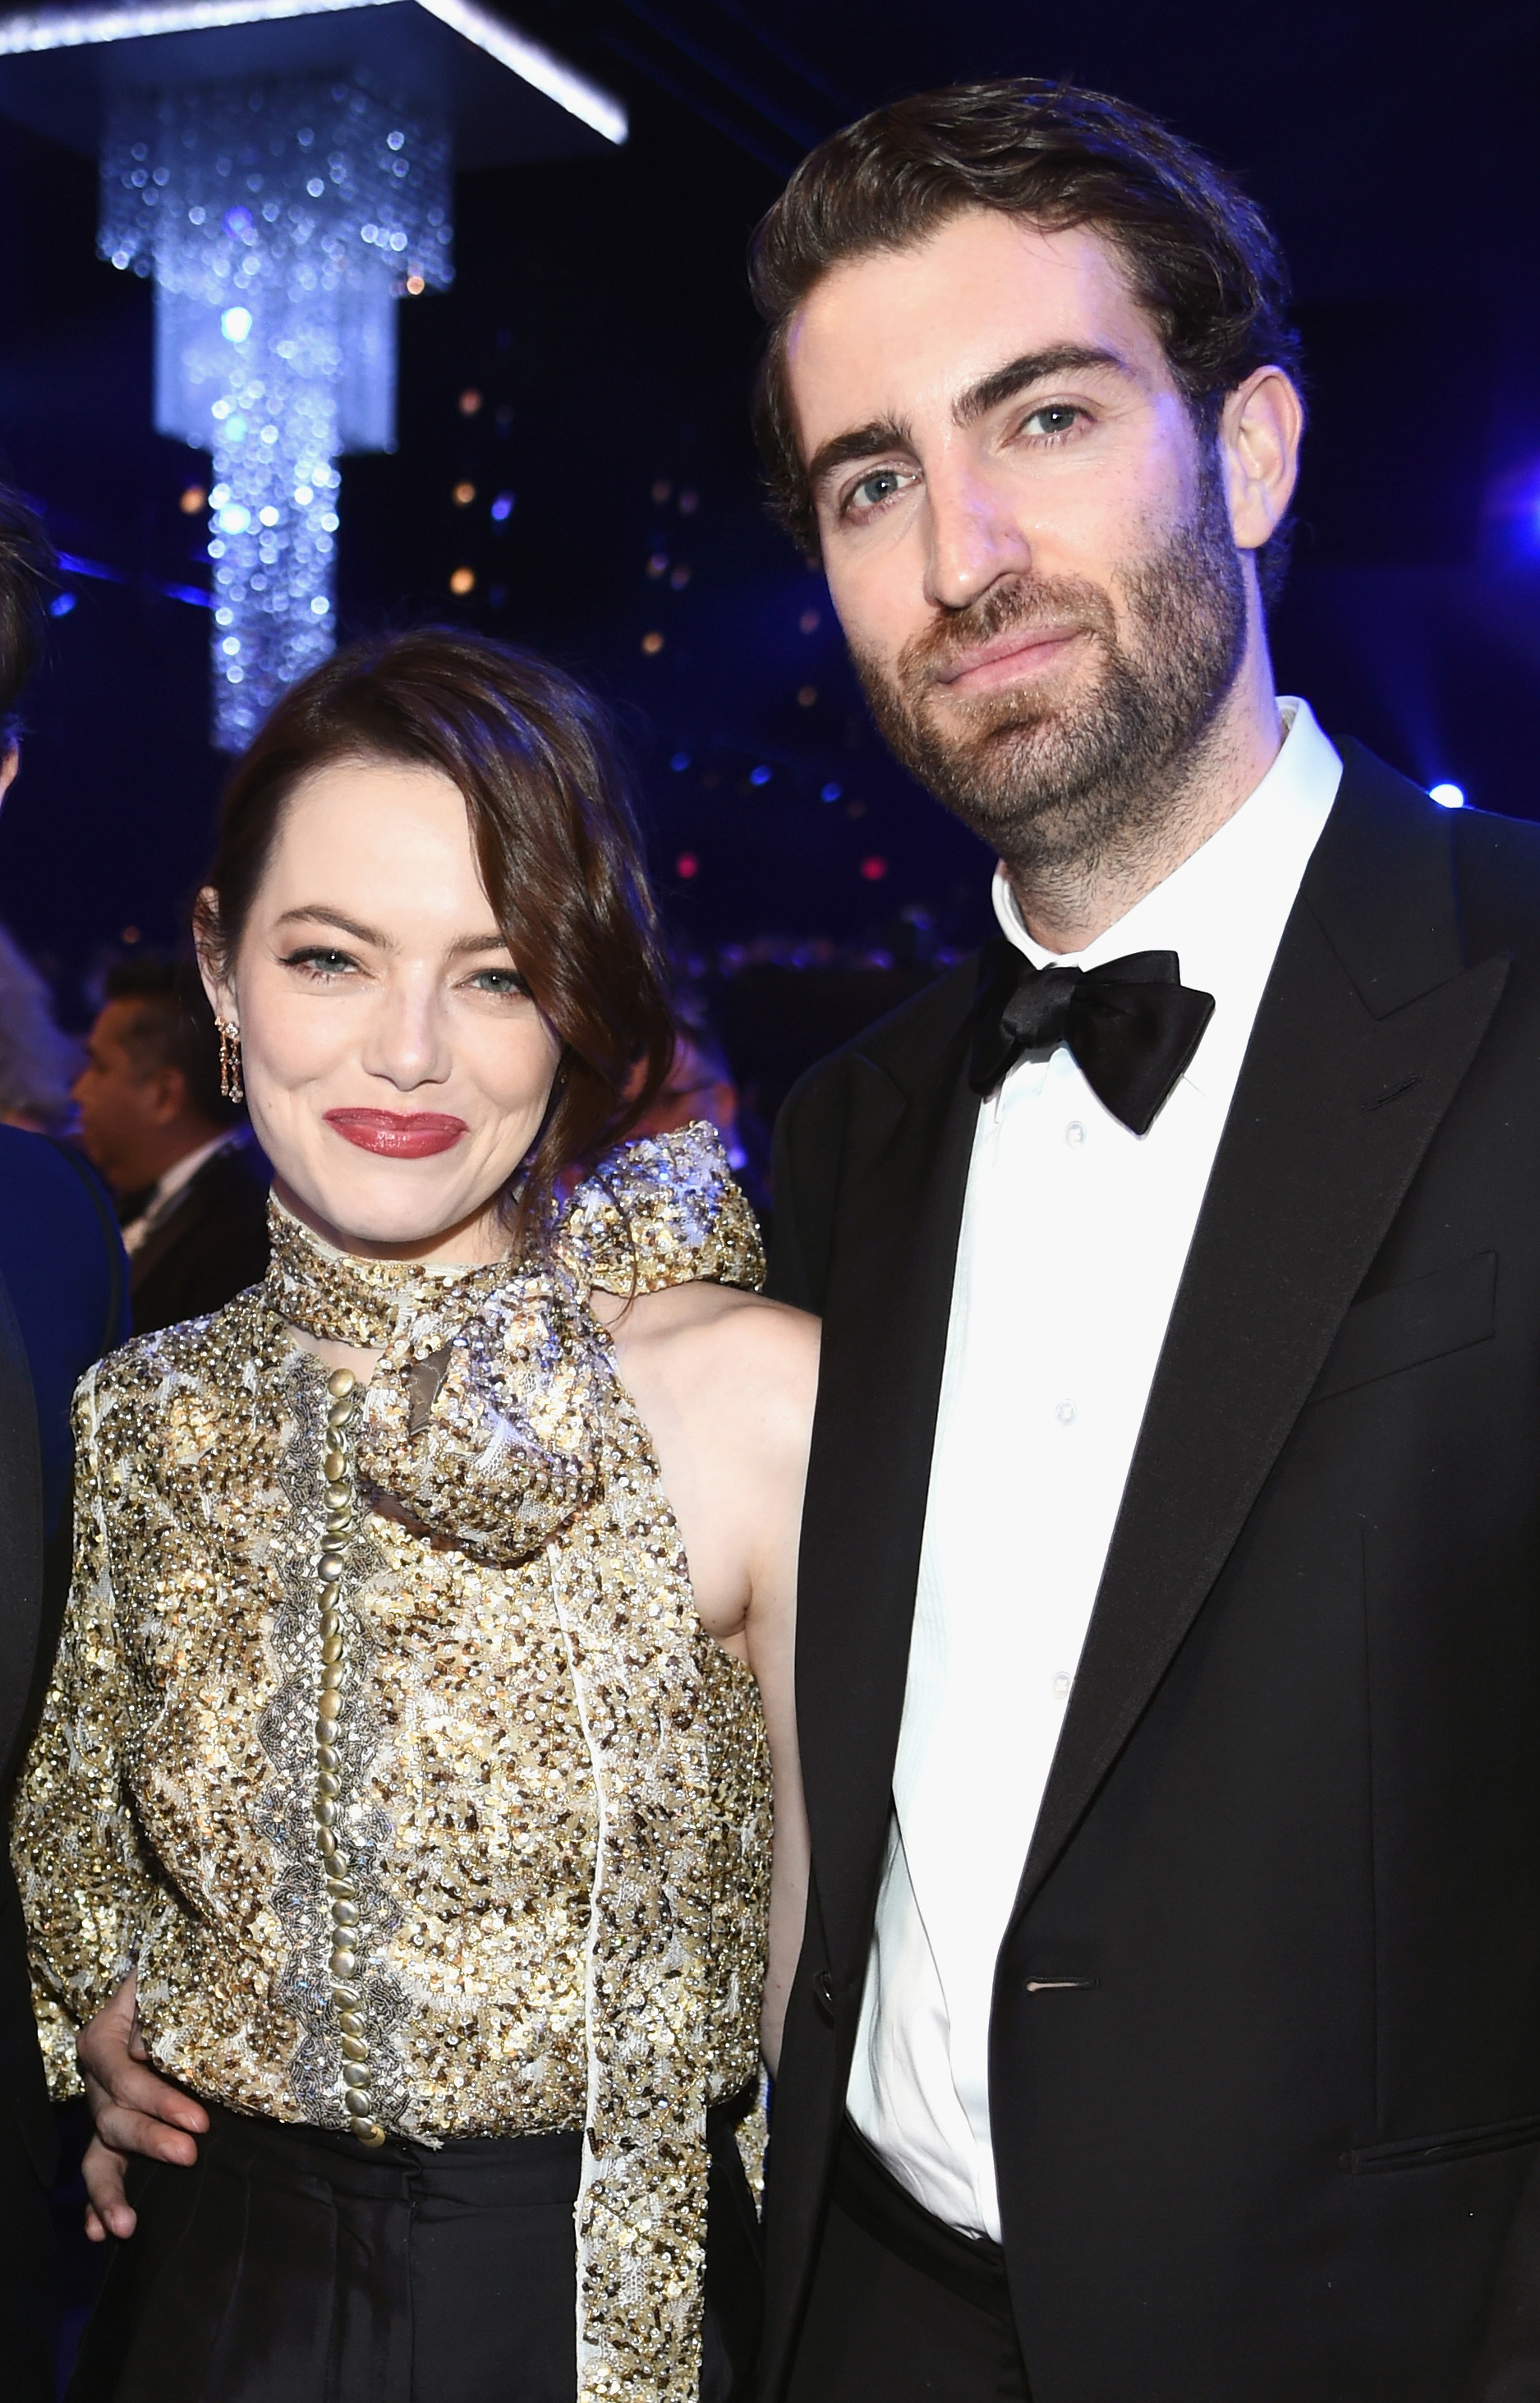 <p>Oscar winner <a href="https://www.wonderwall.com/celebrity/profiles/overview/emma-stone-1299.article">Emma Stone</a> met her now-husband, Dave McCary, when she hosted "Saturday Night Live" in December 2016 and he directed her in a hilarious sketch -- a fake commercial called <a href="https://www.youtube.com/watch?v=BONhk-hbiXk&list=RDGja9MmcY4ag&index=1">"Wells for Boys."</a> A source told <a href="https://pagesix.com/2021/01/07/dave-mccary-proposed-to-emma-stone-in-an-snl-office/">Page Six</a> that Dave returned to the place they met to pop the question in late 2019. "Dave proposed at the offices where they first met at 30 Rock," NBC's headquarters in Rockefeller Center in New York City, the source explained. "No one was there and by all accounts, it was very romantic." The couple quietly married in 2020 and welcomed a daughter in 2021.</p>